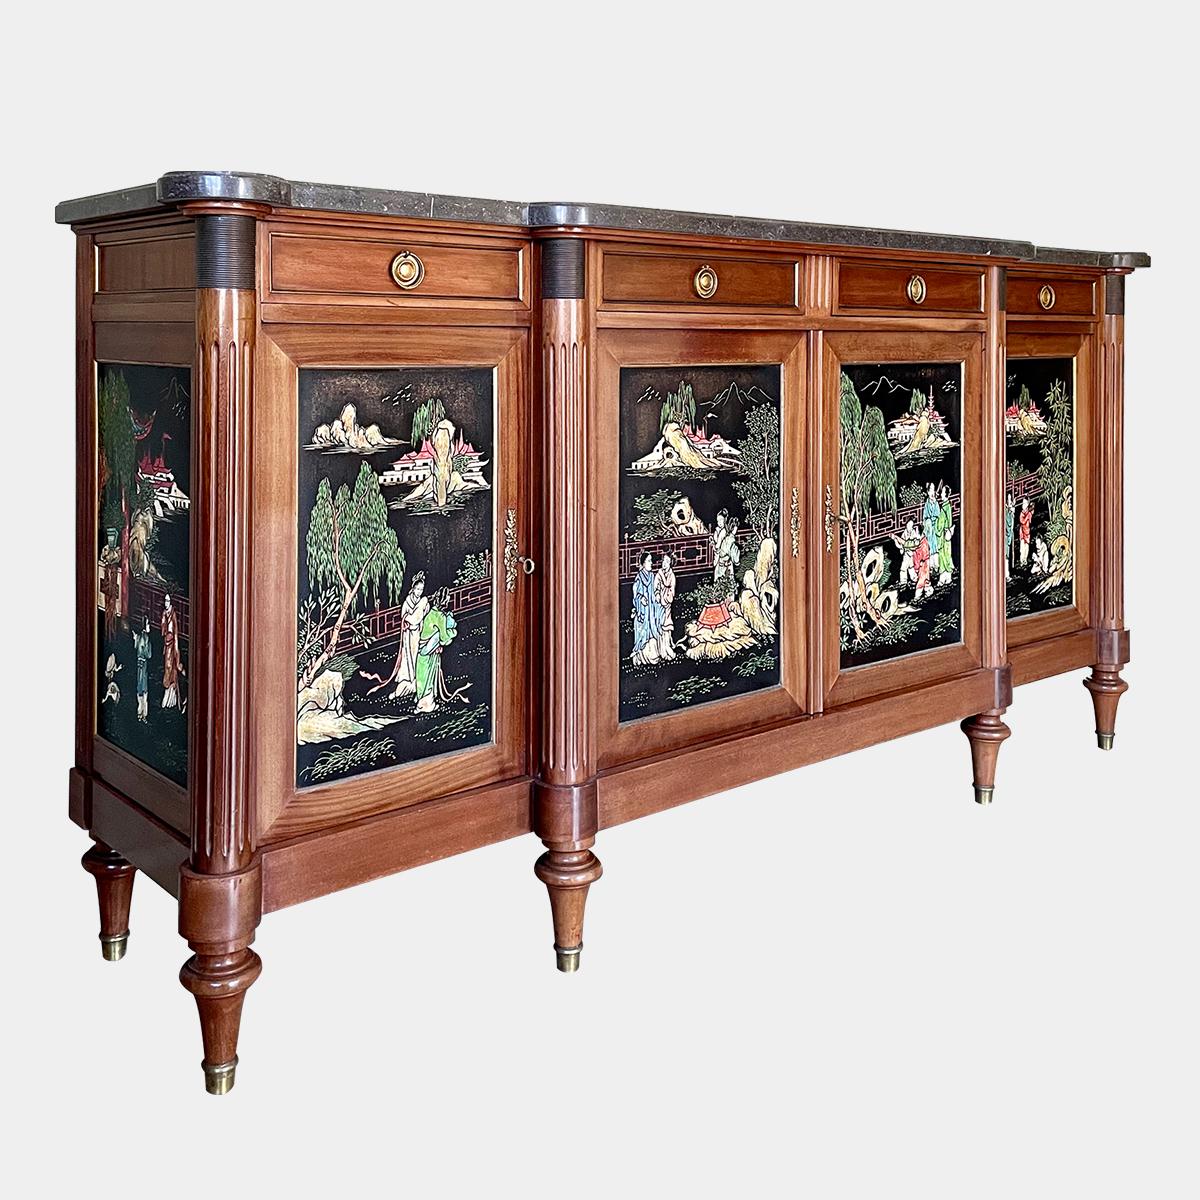 A large Chinoiserie style French sideboard/Enfilade in walnut with a Belgian fossil marble top and painted Chinoiserie panels. All original brass handles, sabot feet, locks and keys. Early to mid 20th century in the Louis XVI manner.